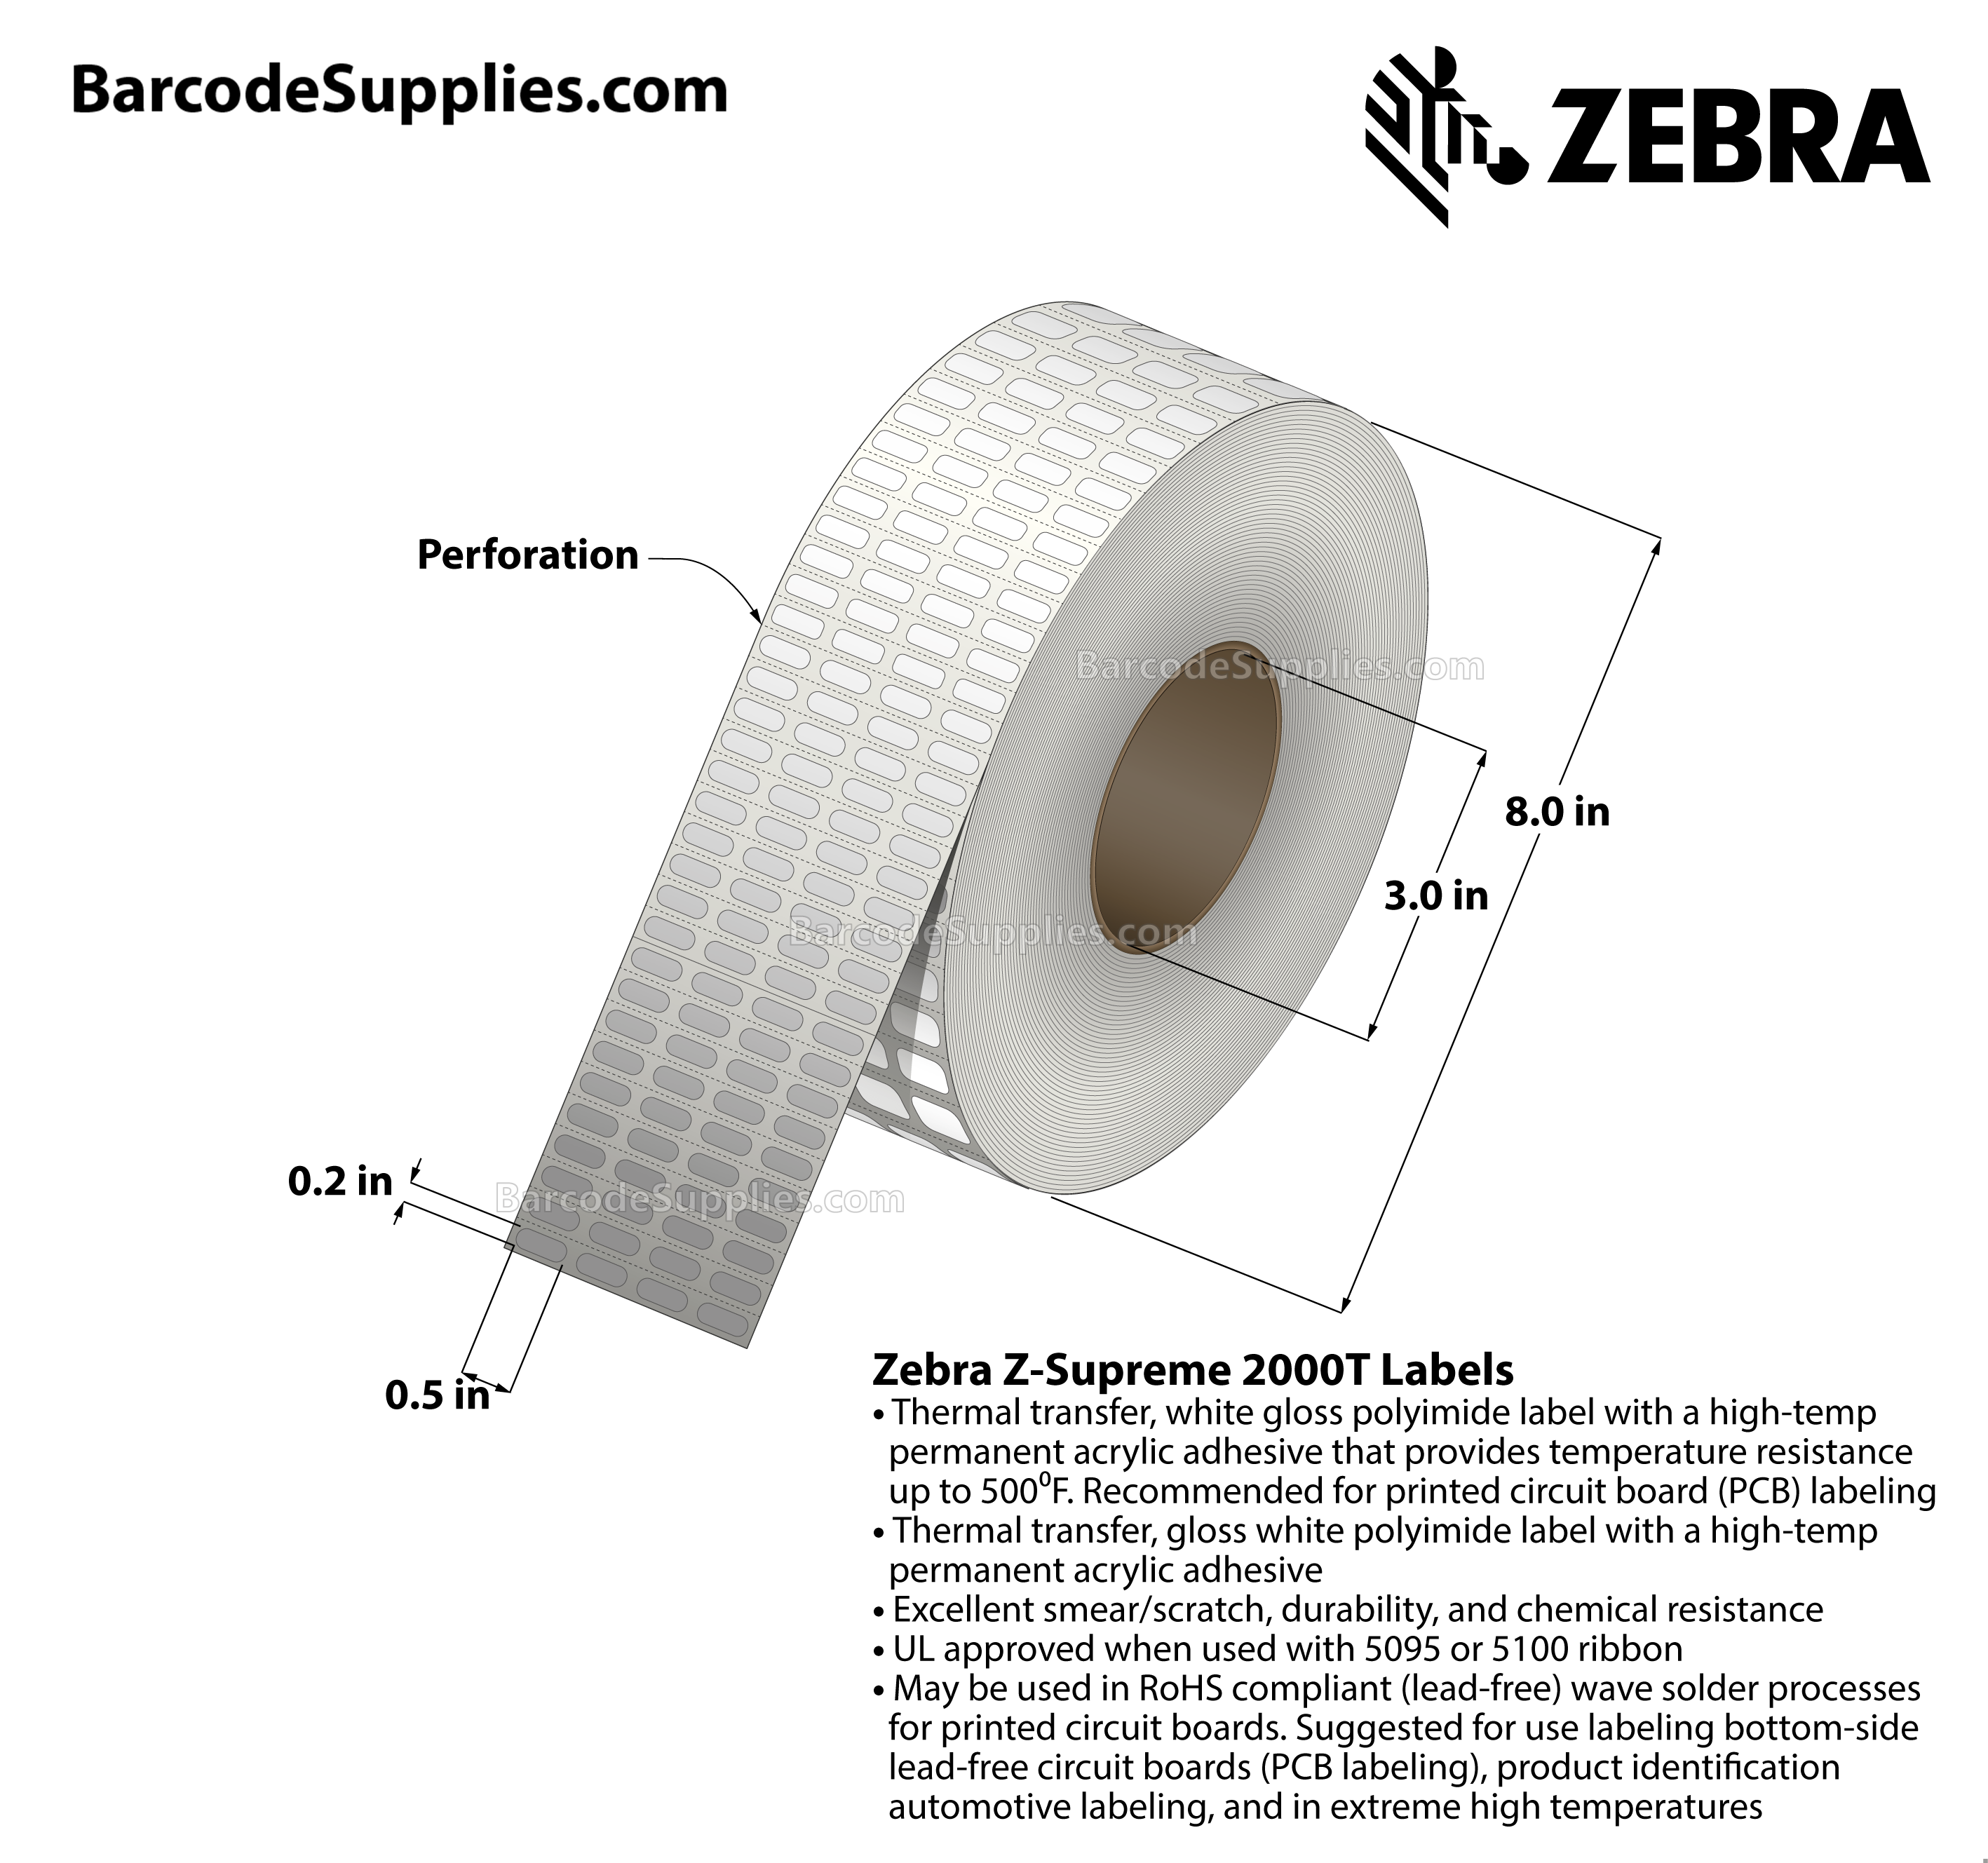 0.5 x 0.2 Thermal Transfer White Z-Supreme 2000T (4-Across) Labels With High-temp Adhesive - Perforated - 10000 Labels Per Roll - Carton Of 1 Rolls - 10000 Labels Total - MPN: 10023027